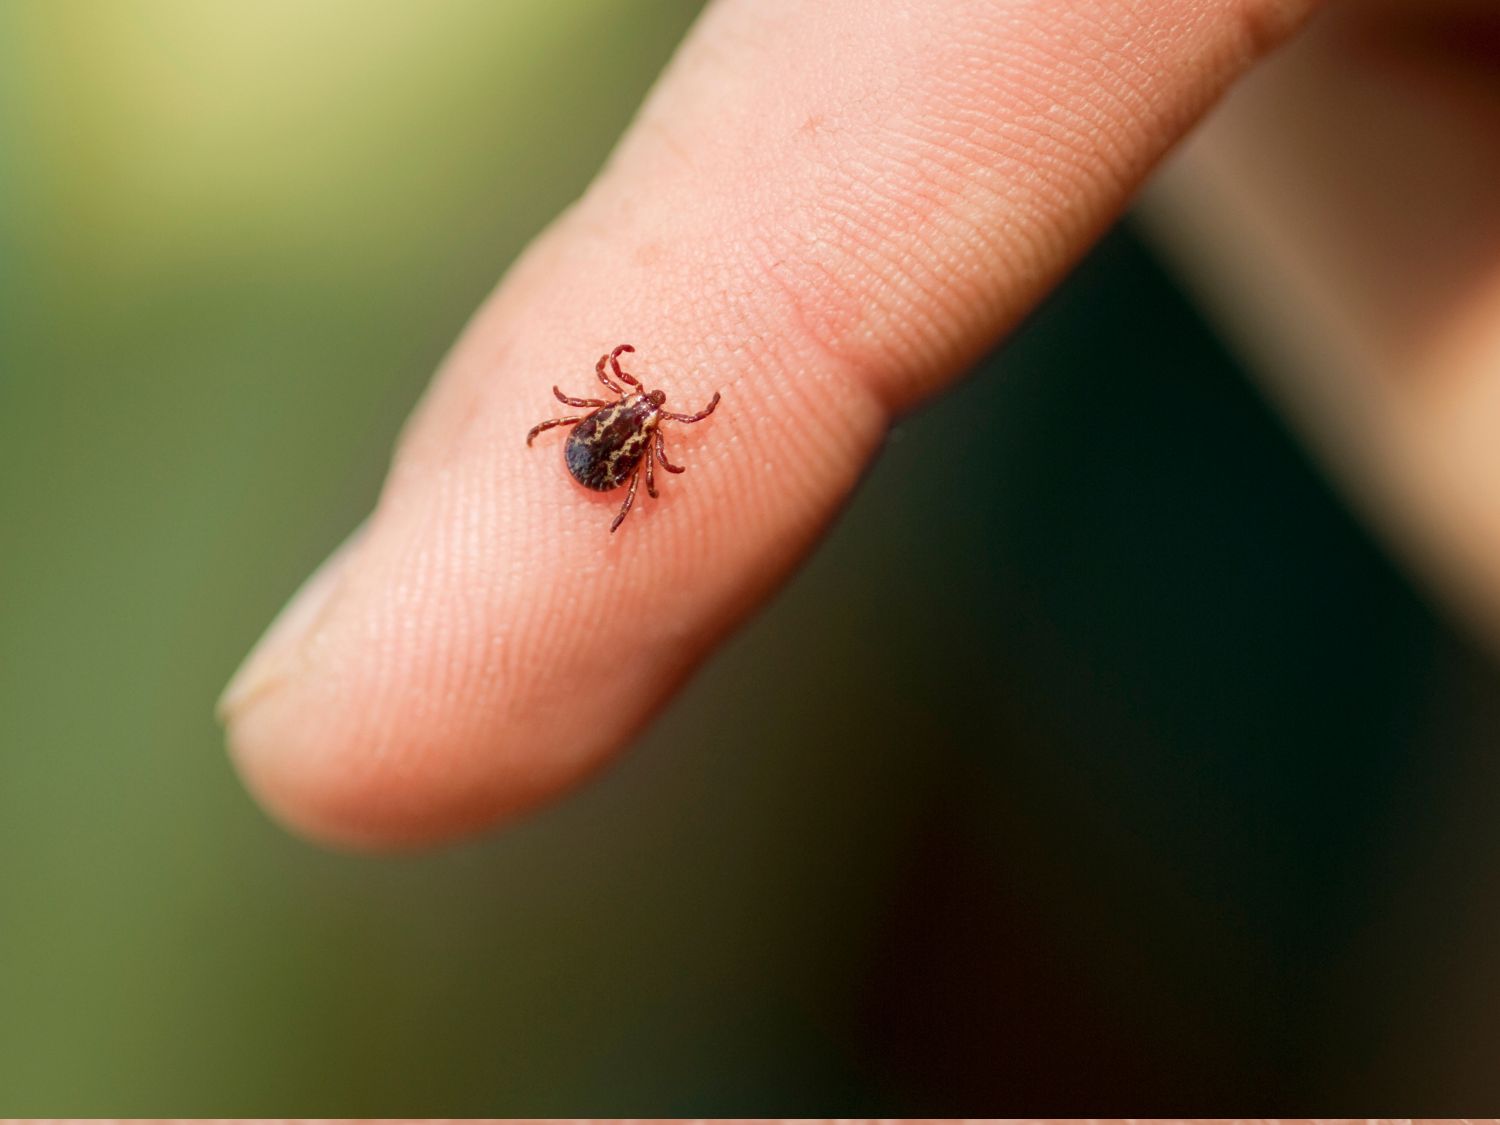 A photo of a tick crawling on a finger